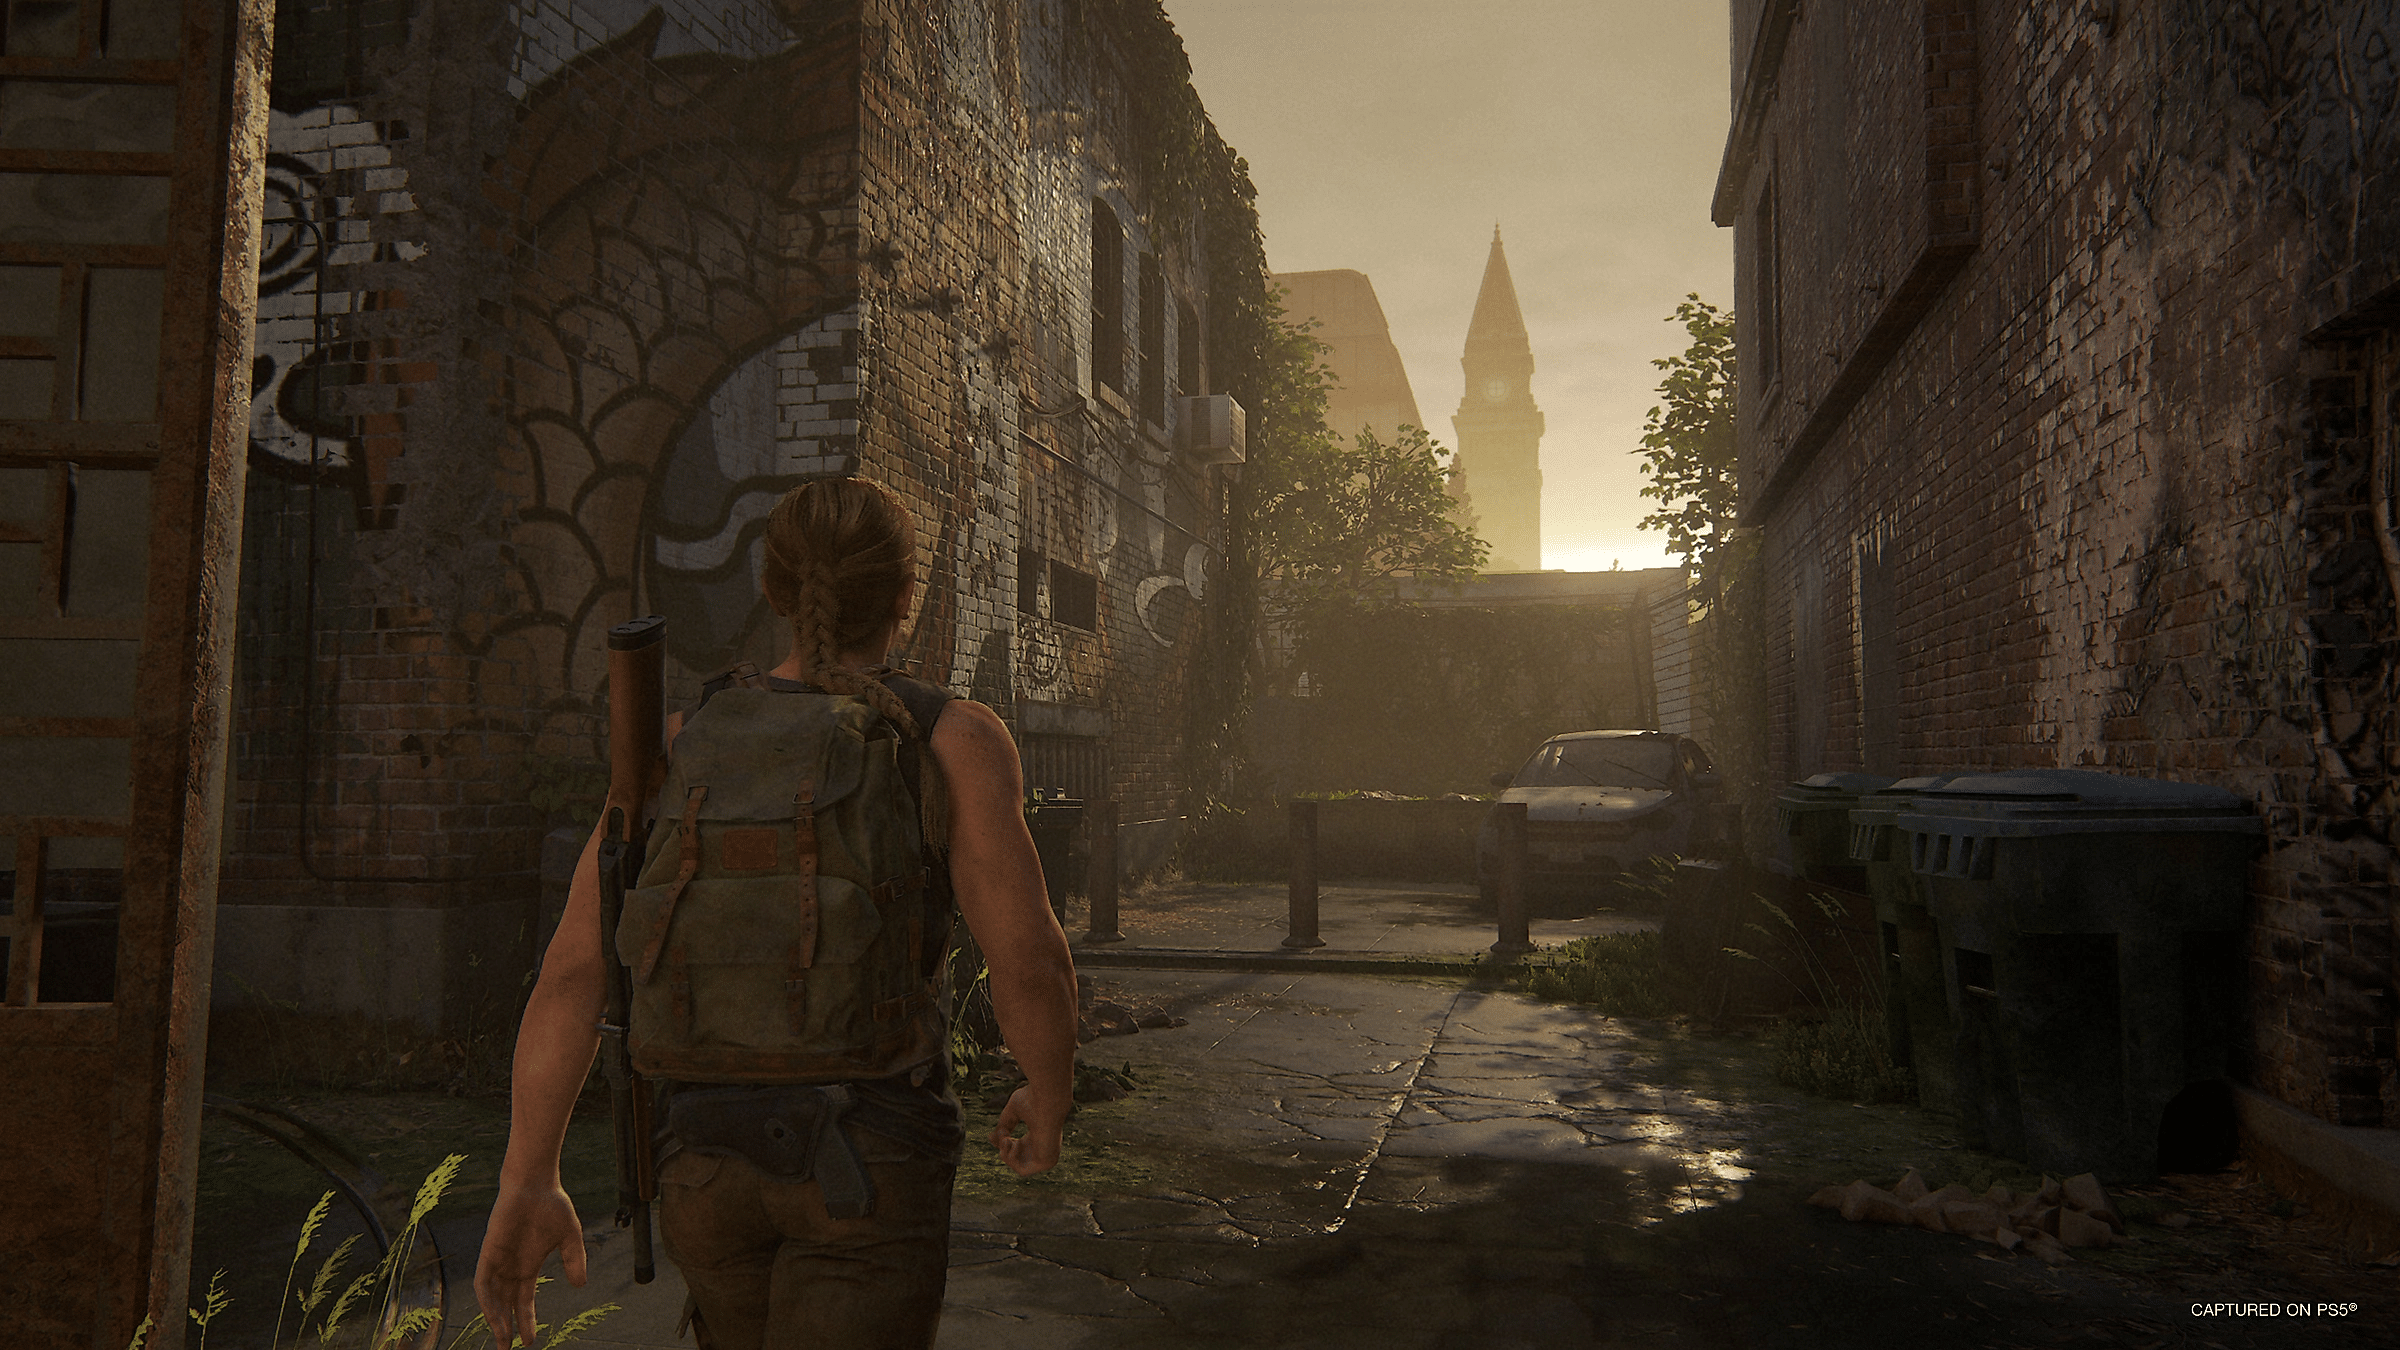 Naughty Dog, LLC - Introducing our new Inside The Last of Us Part